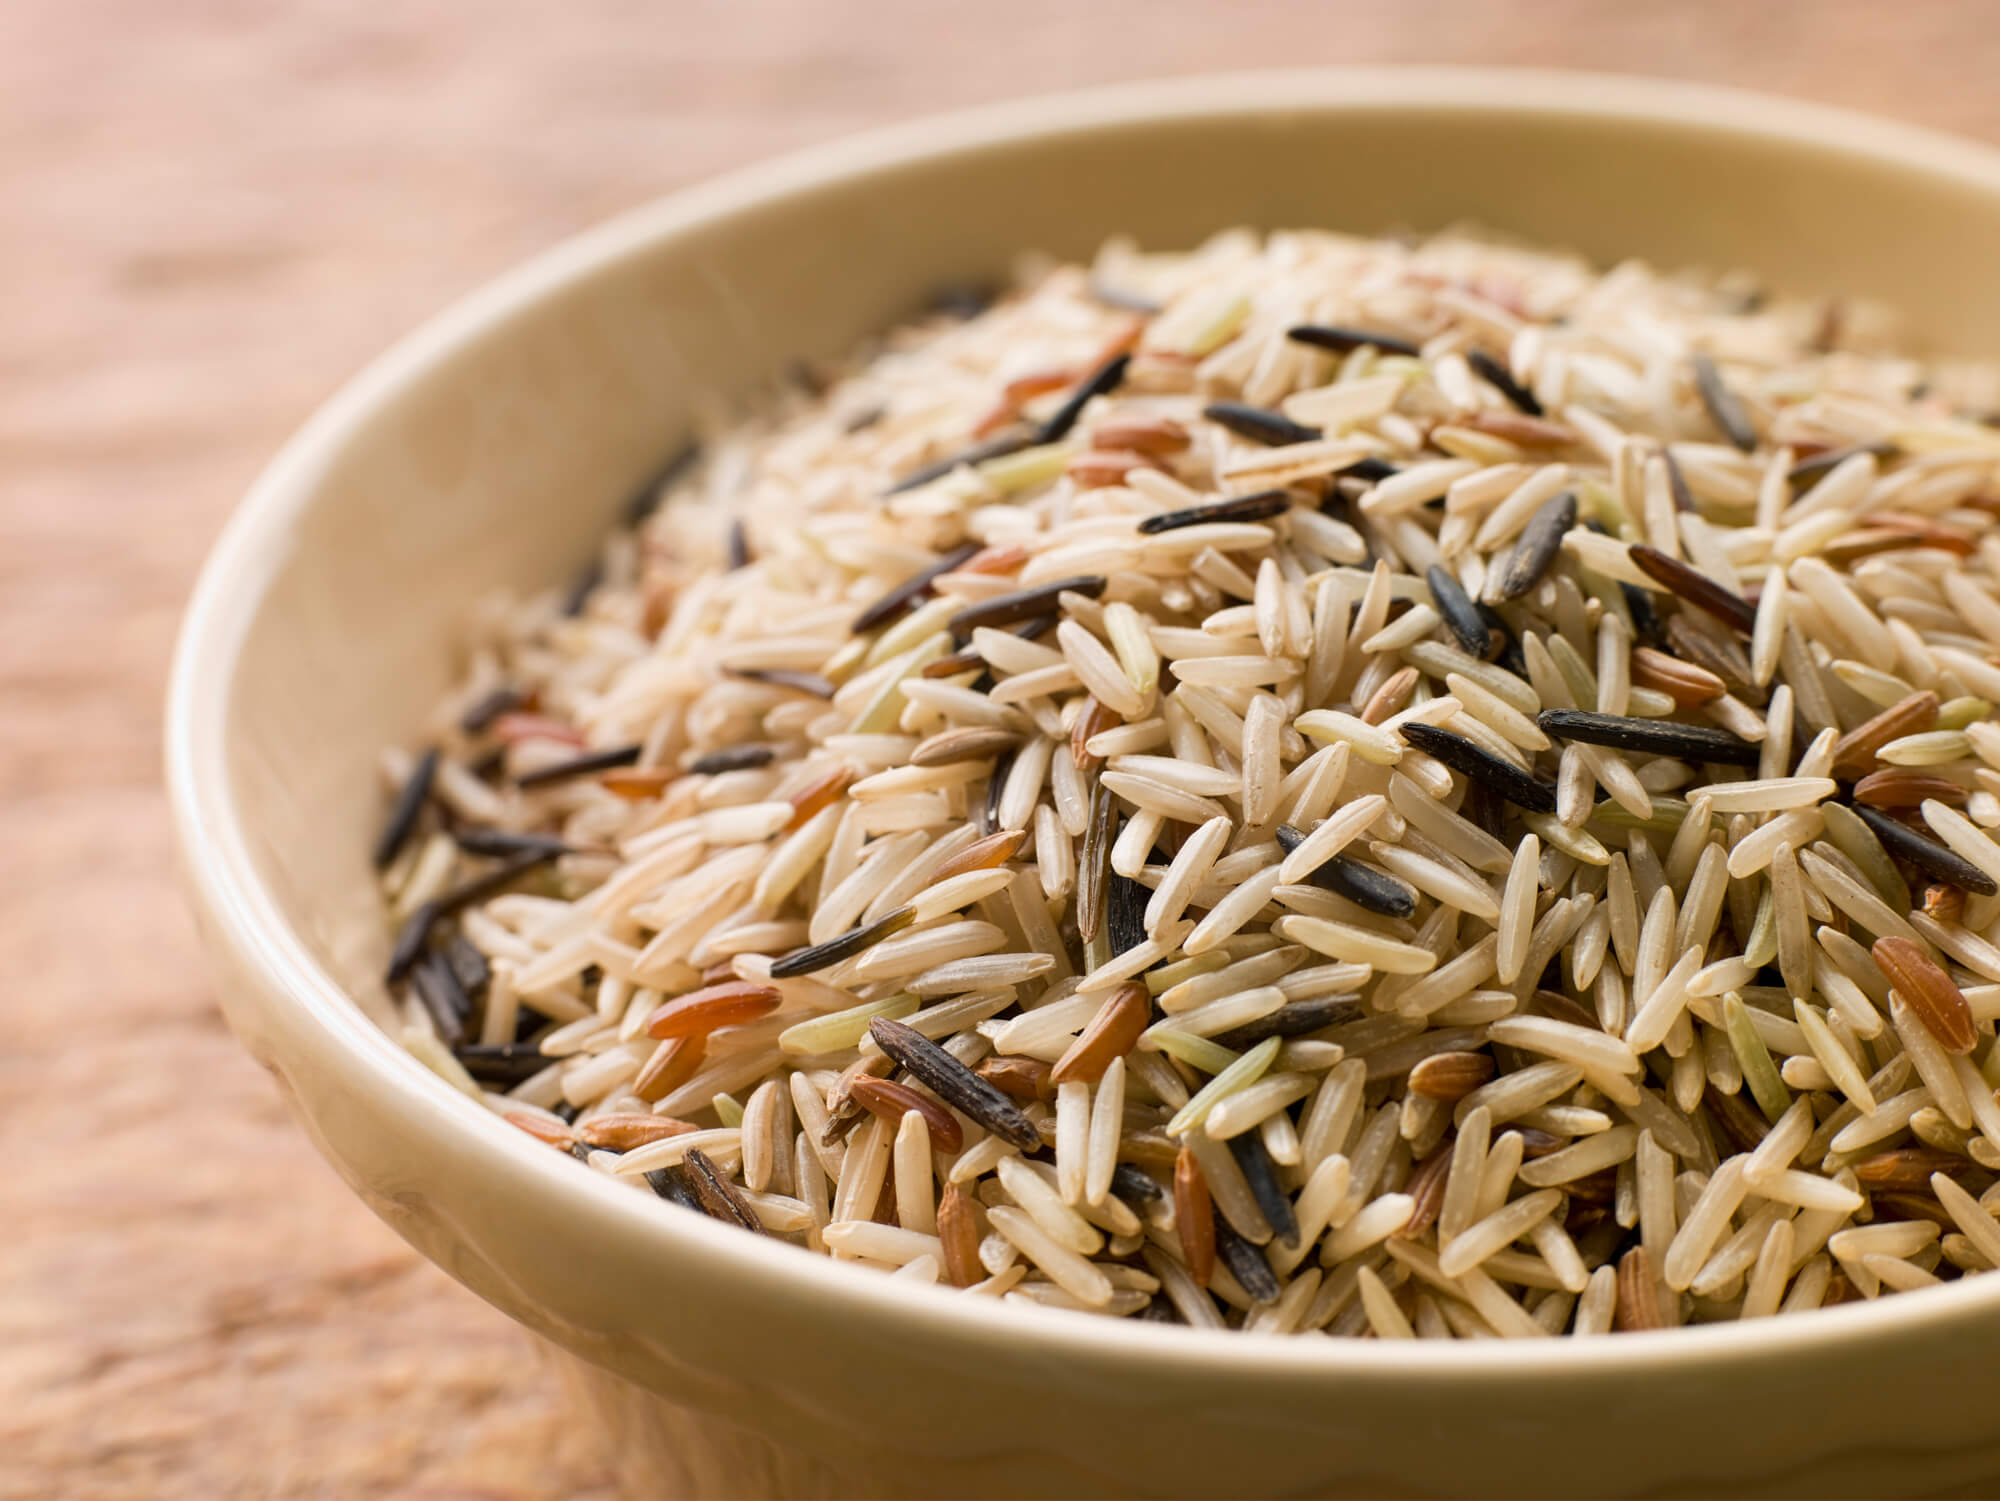 Learn how to cook wild rice in a rice cooker by Rice Cooker Guy. Image of a bowl of uncooked wild rice.